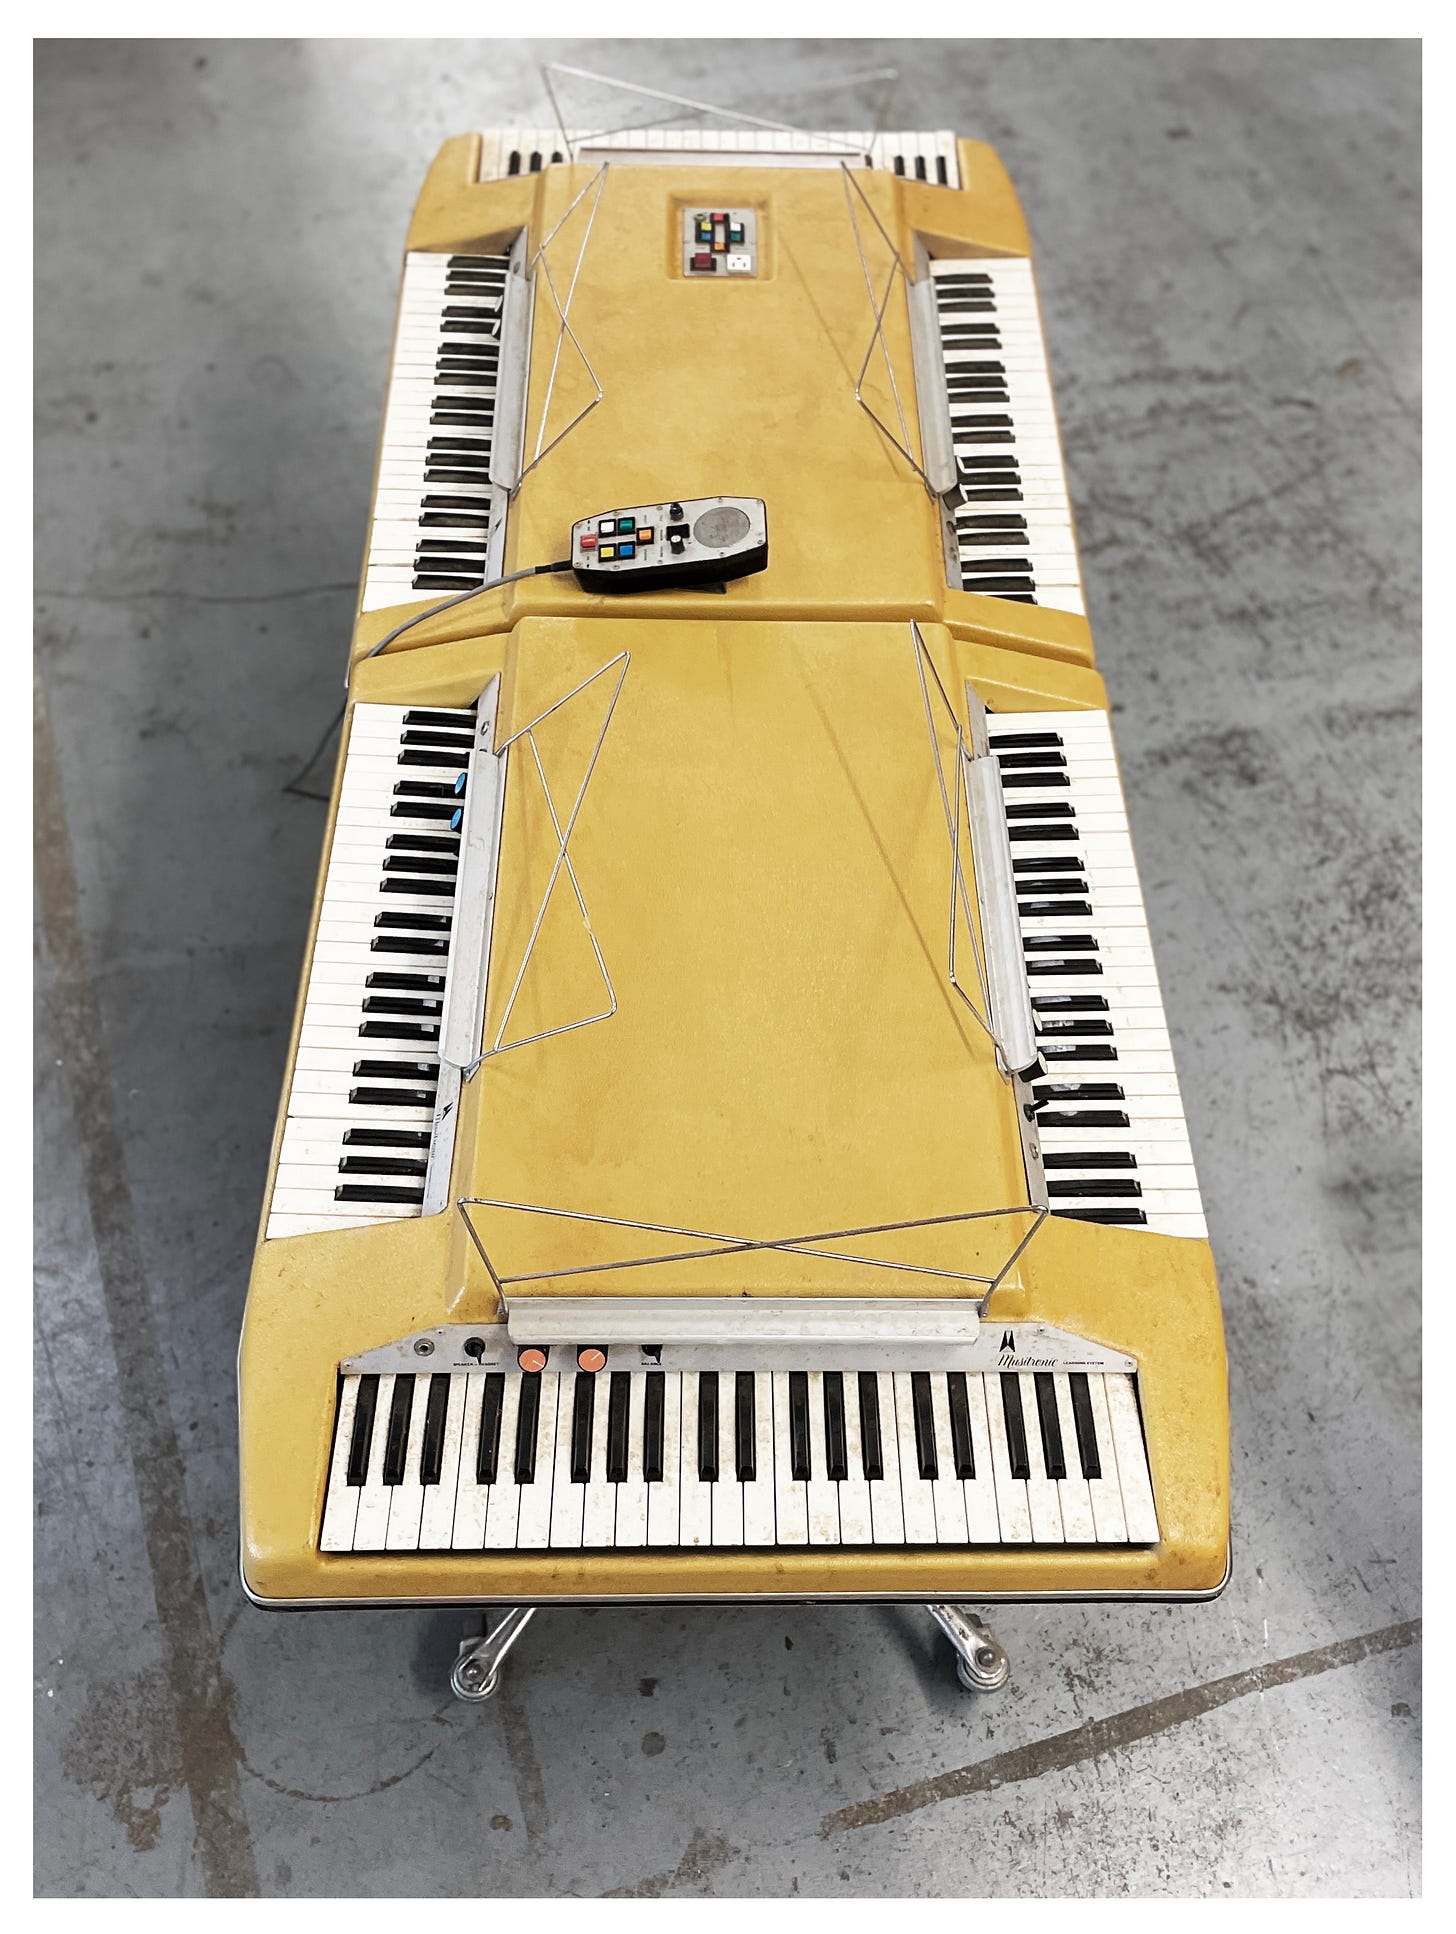 A beige instrument, the Wurlitzer Musitronic Learning System, with six keyboards built into it.